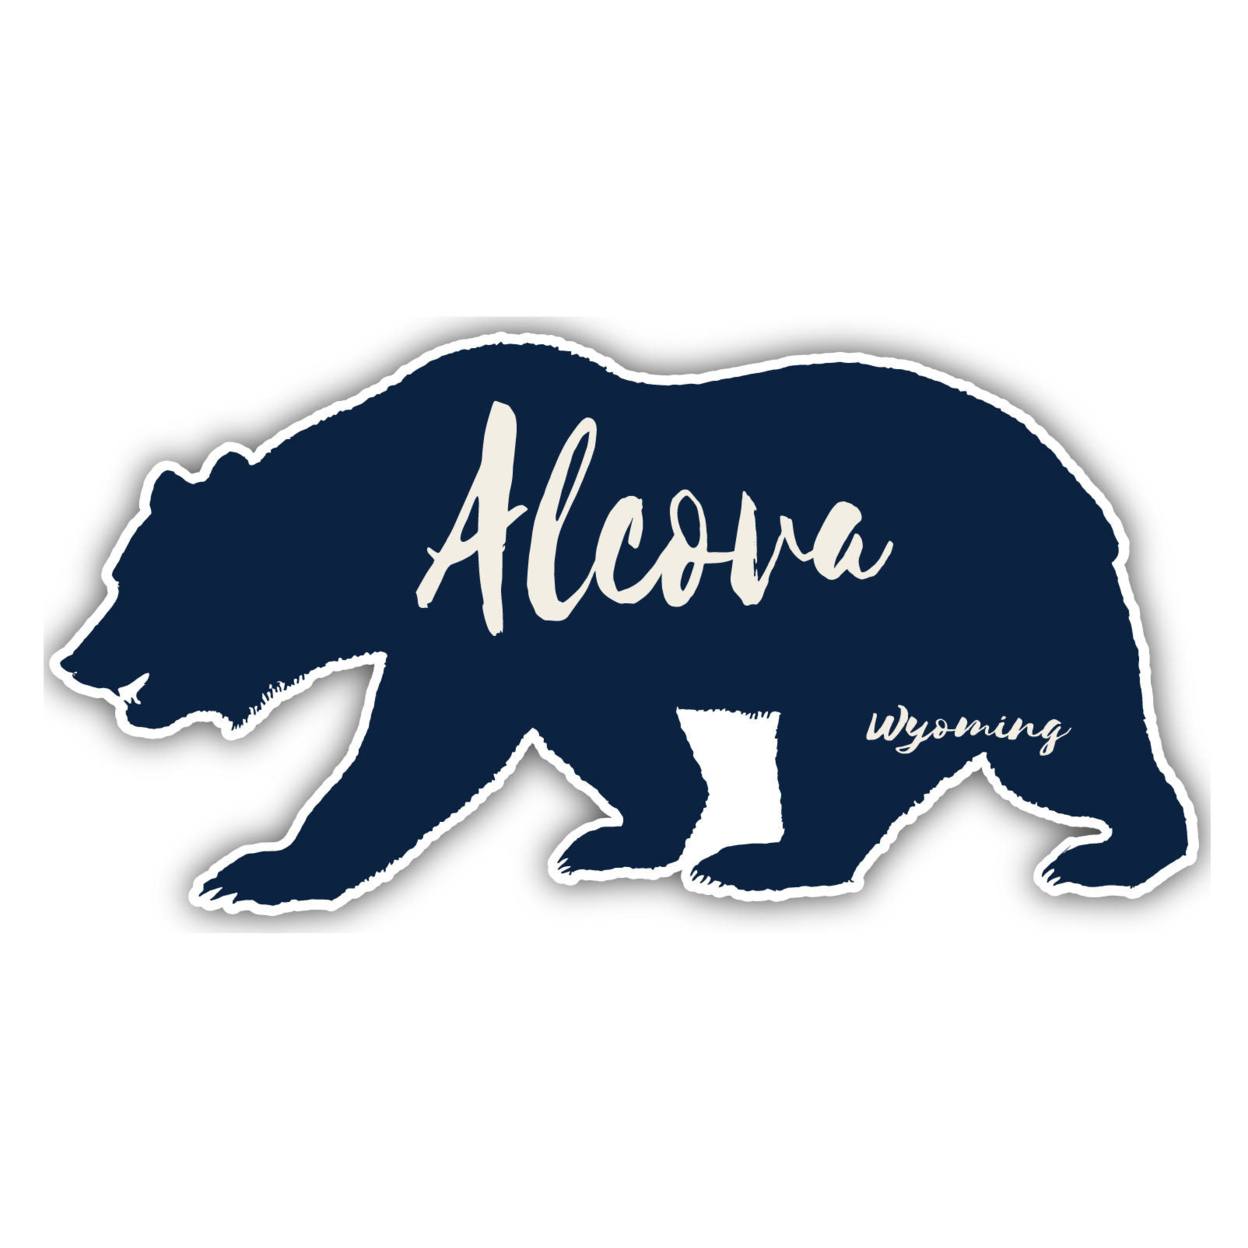 Alcova Wyoming Souvenir Decorative Stickers (Choose Theme And Size) - 4-Pack, 4-Inch, Tent